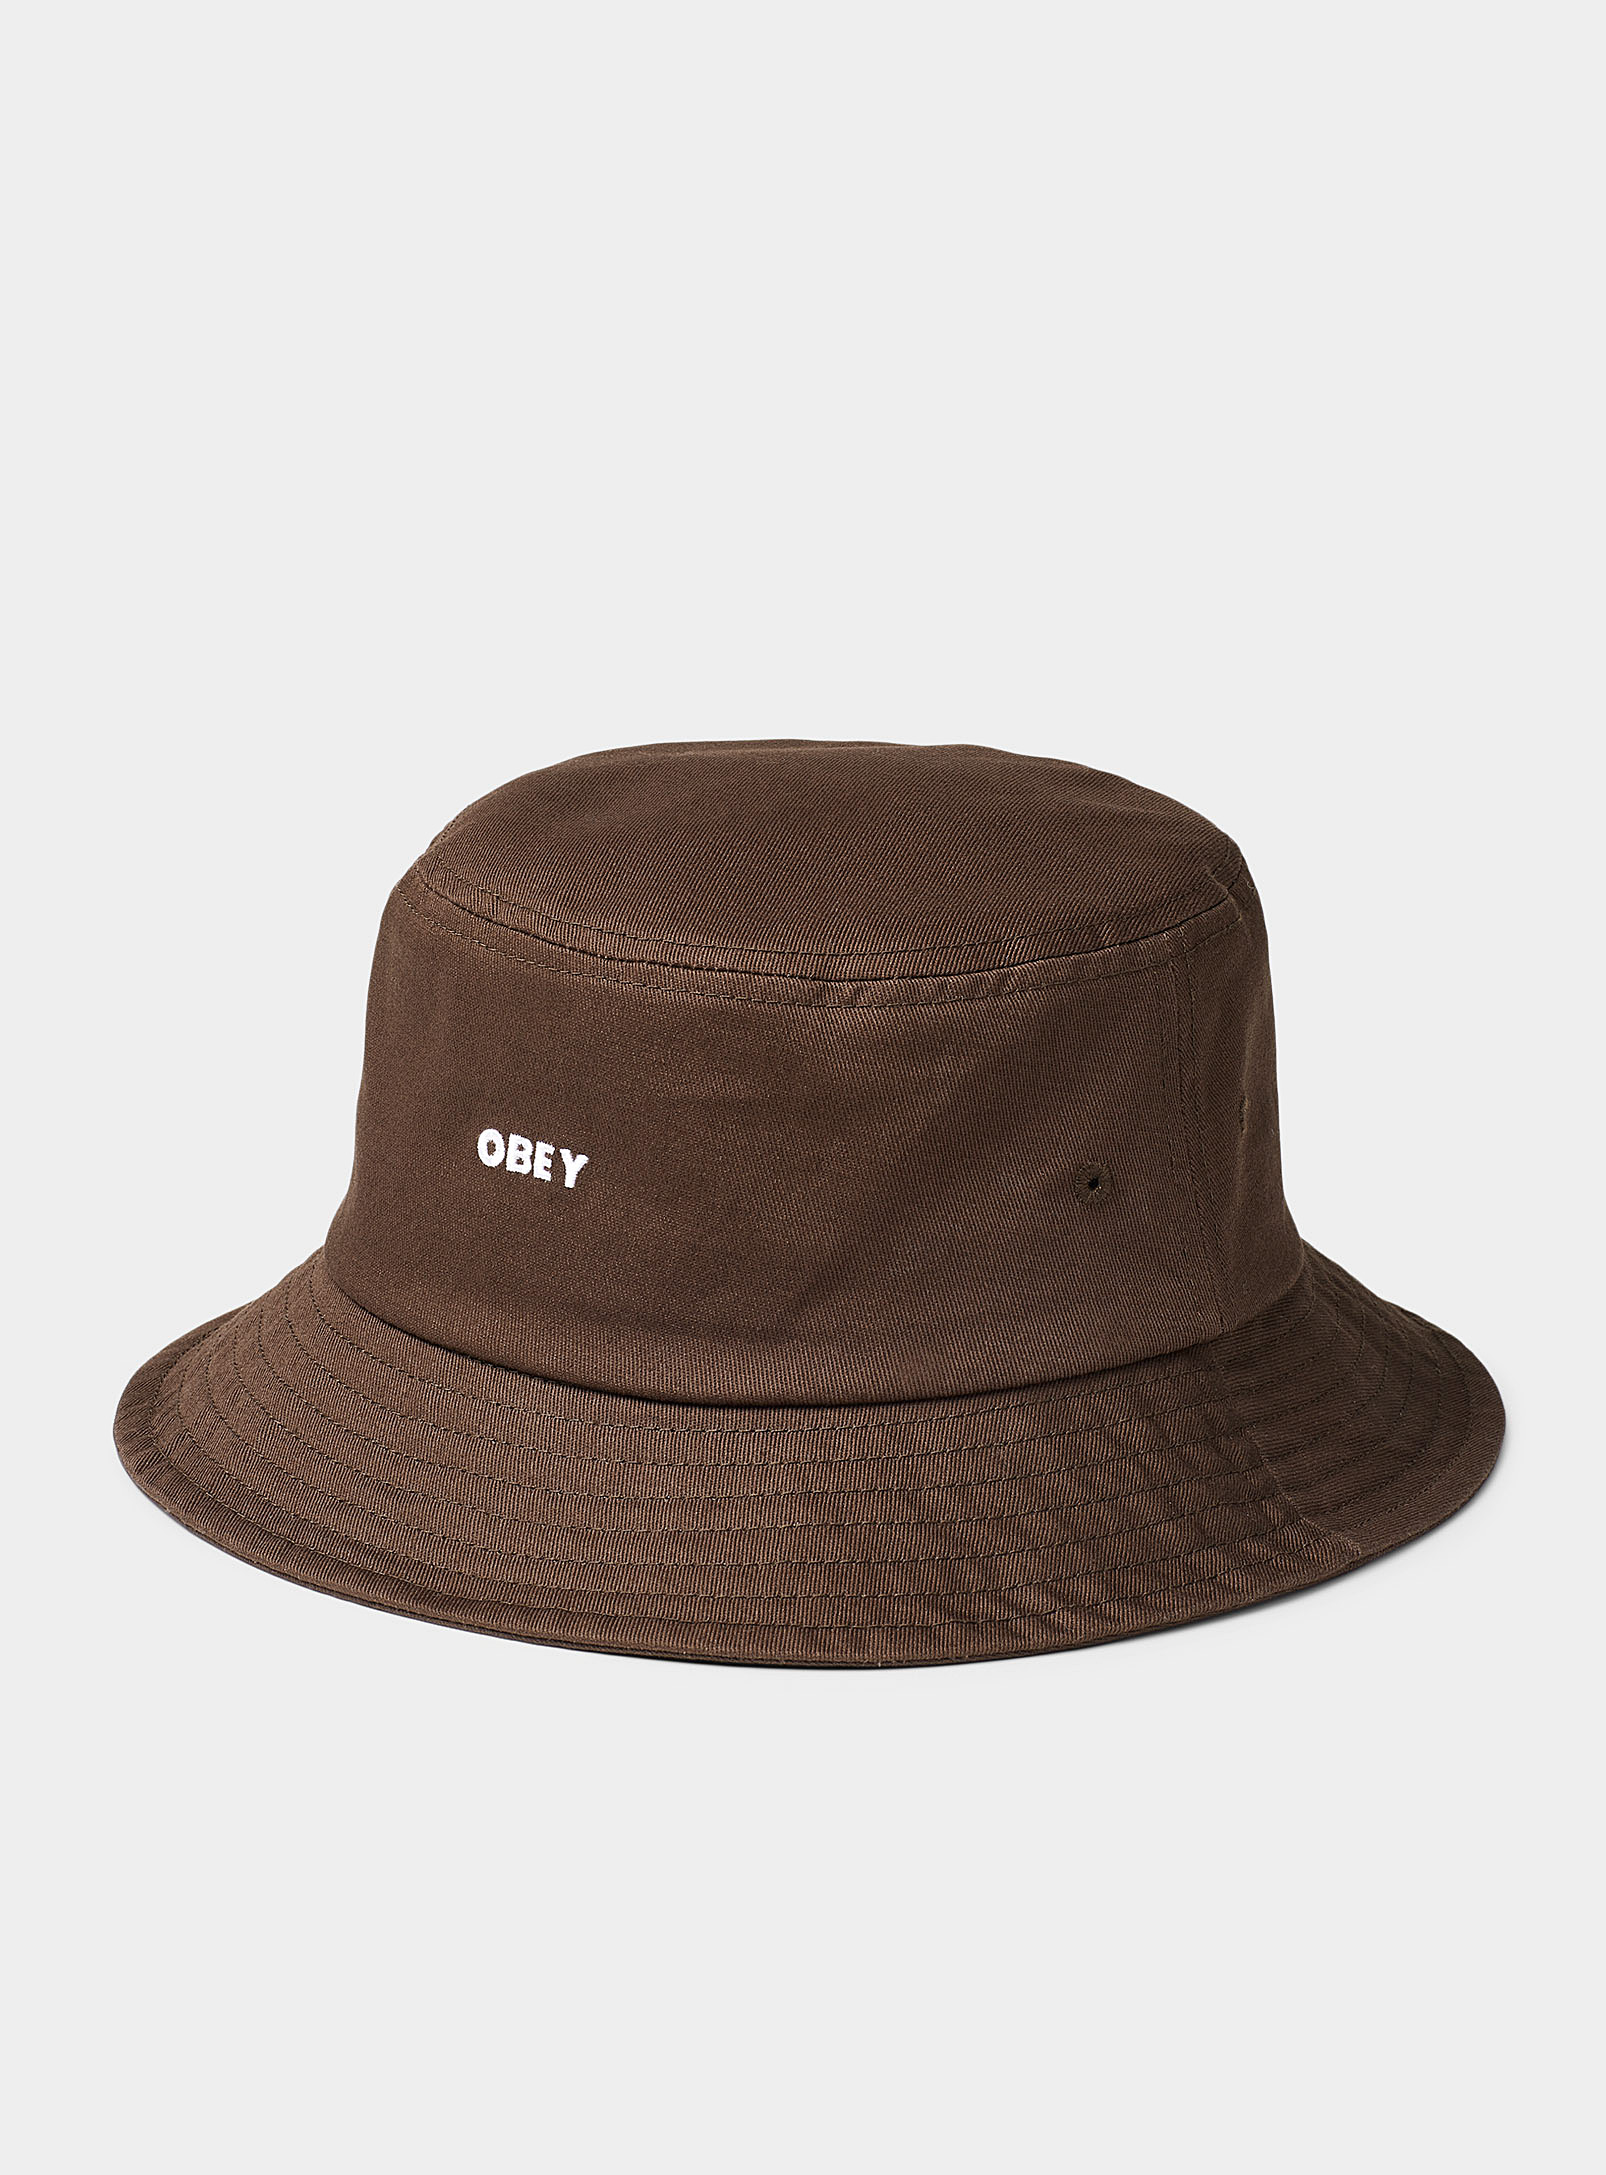 Obey Embroidered Logo Bucket Hat In Brown